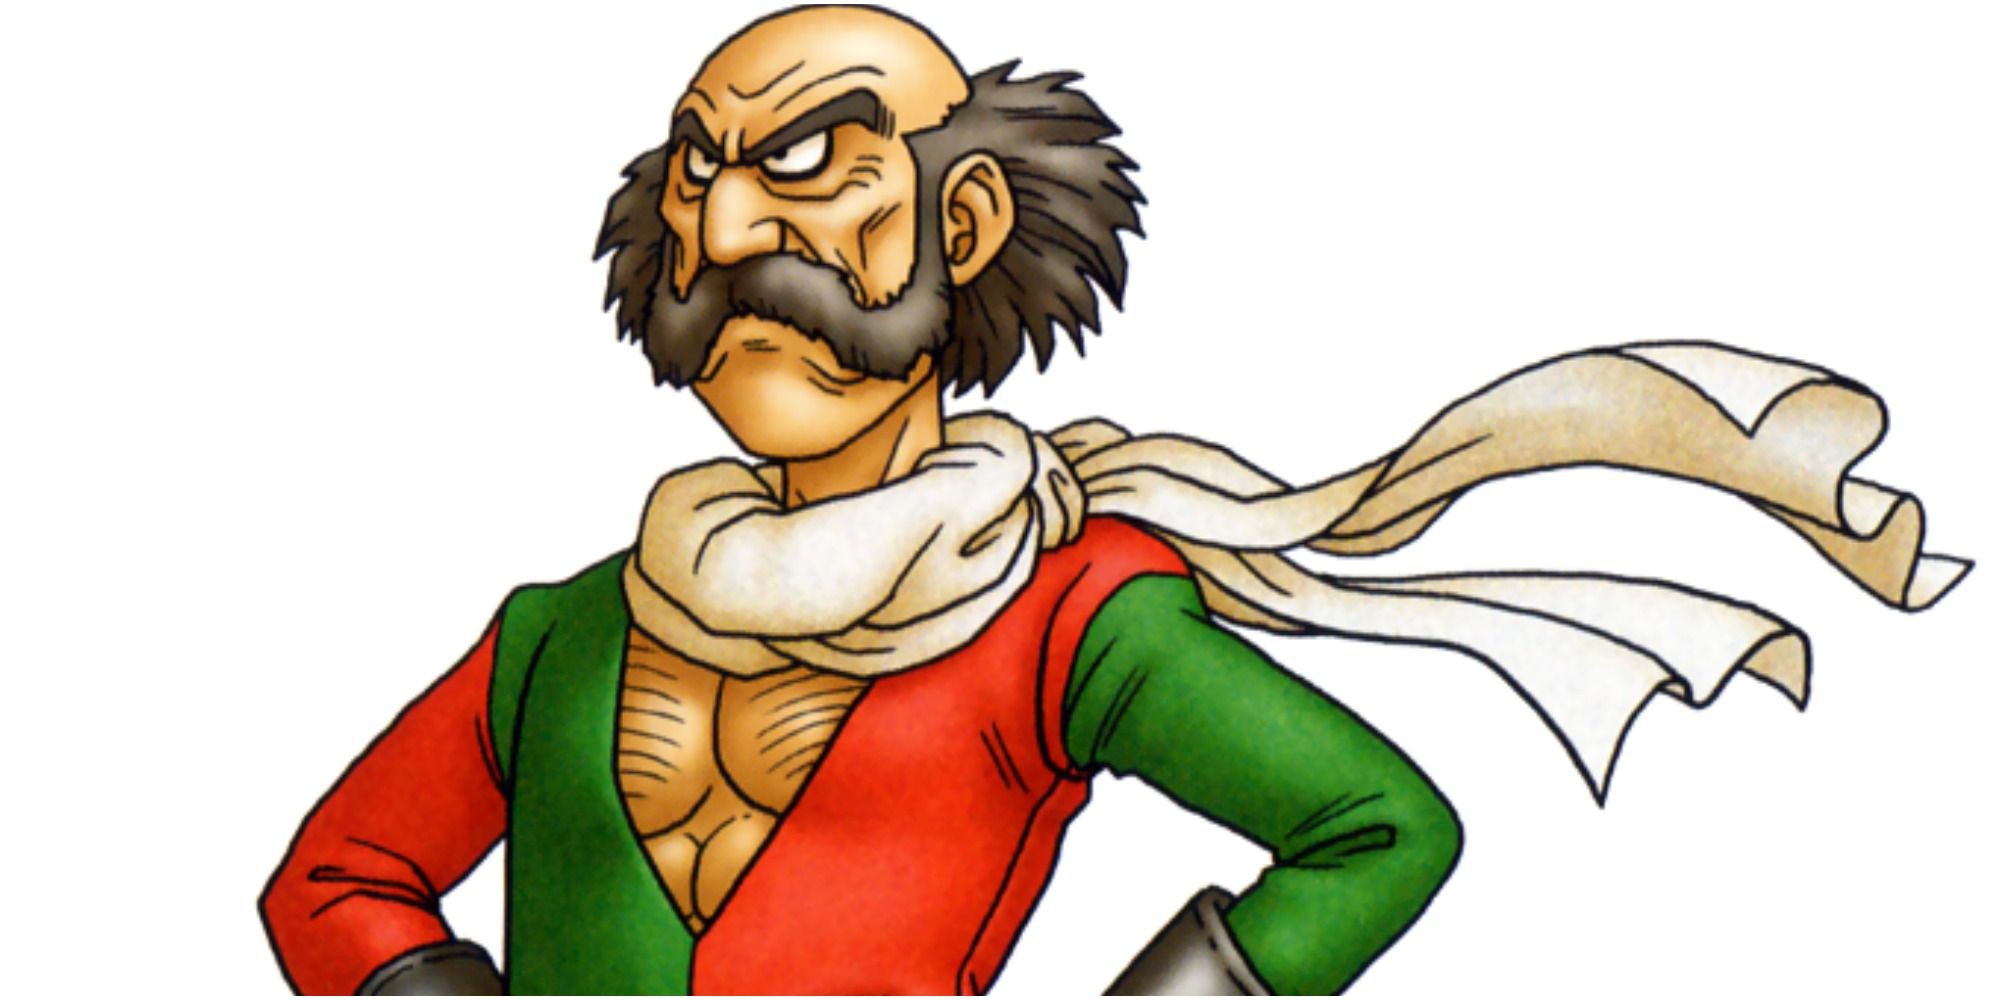 Additional Party Member Morrie Mozzarella from Dragon Quest 8: Journey of the Cursed King